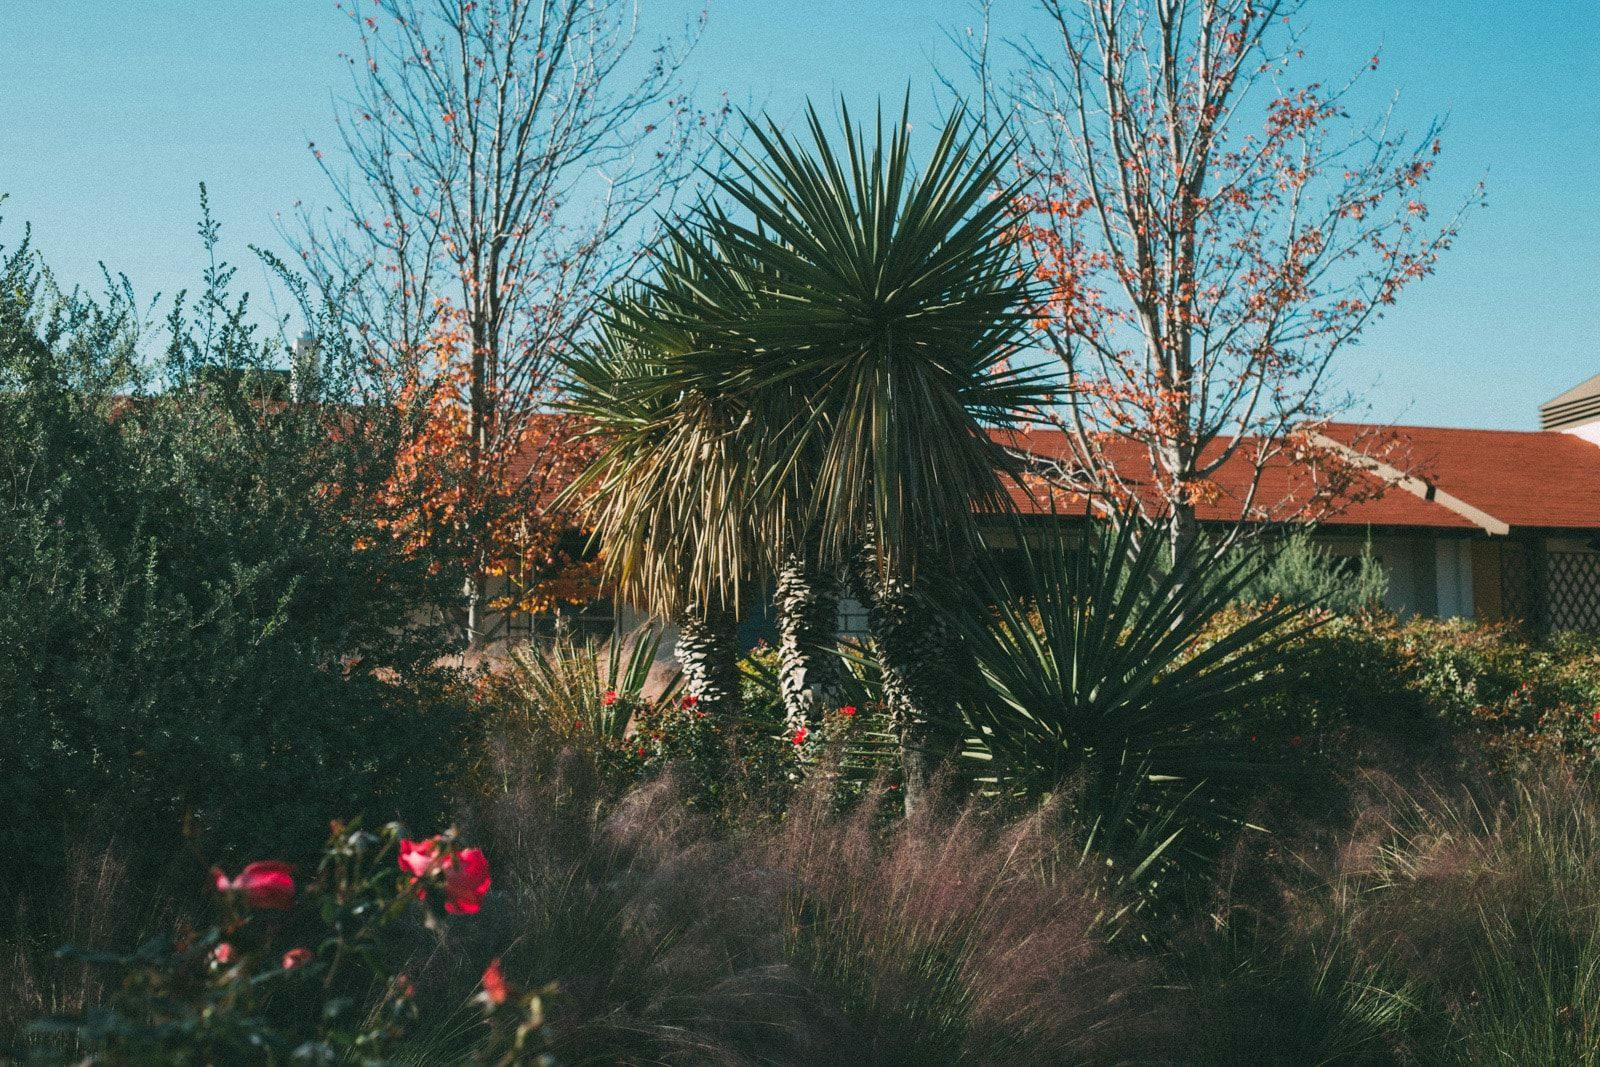 Yucca and other plants in front of a building